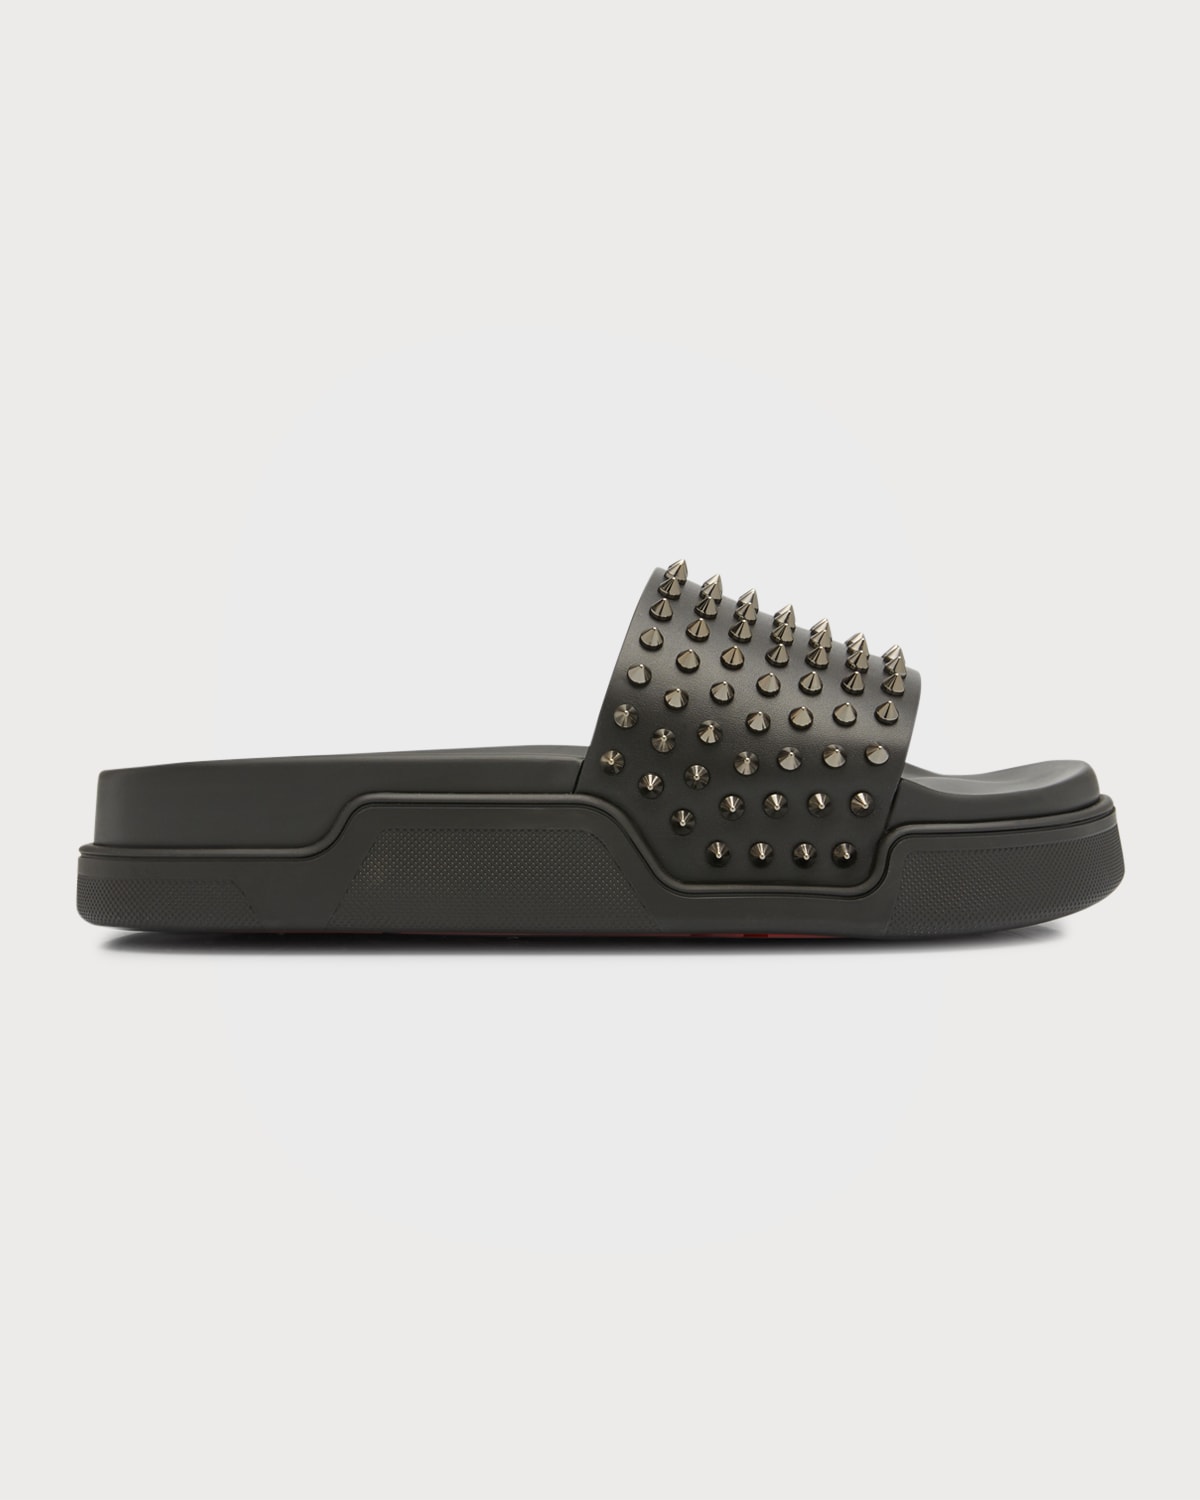 Men's Pool Fun Spiked Leather Slide Sandals